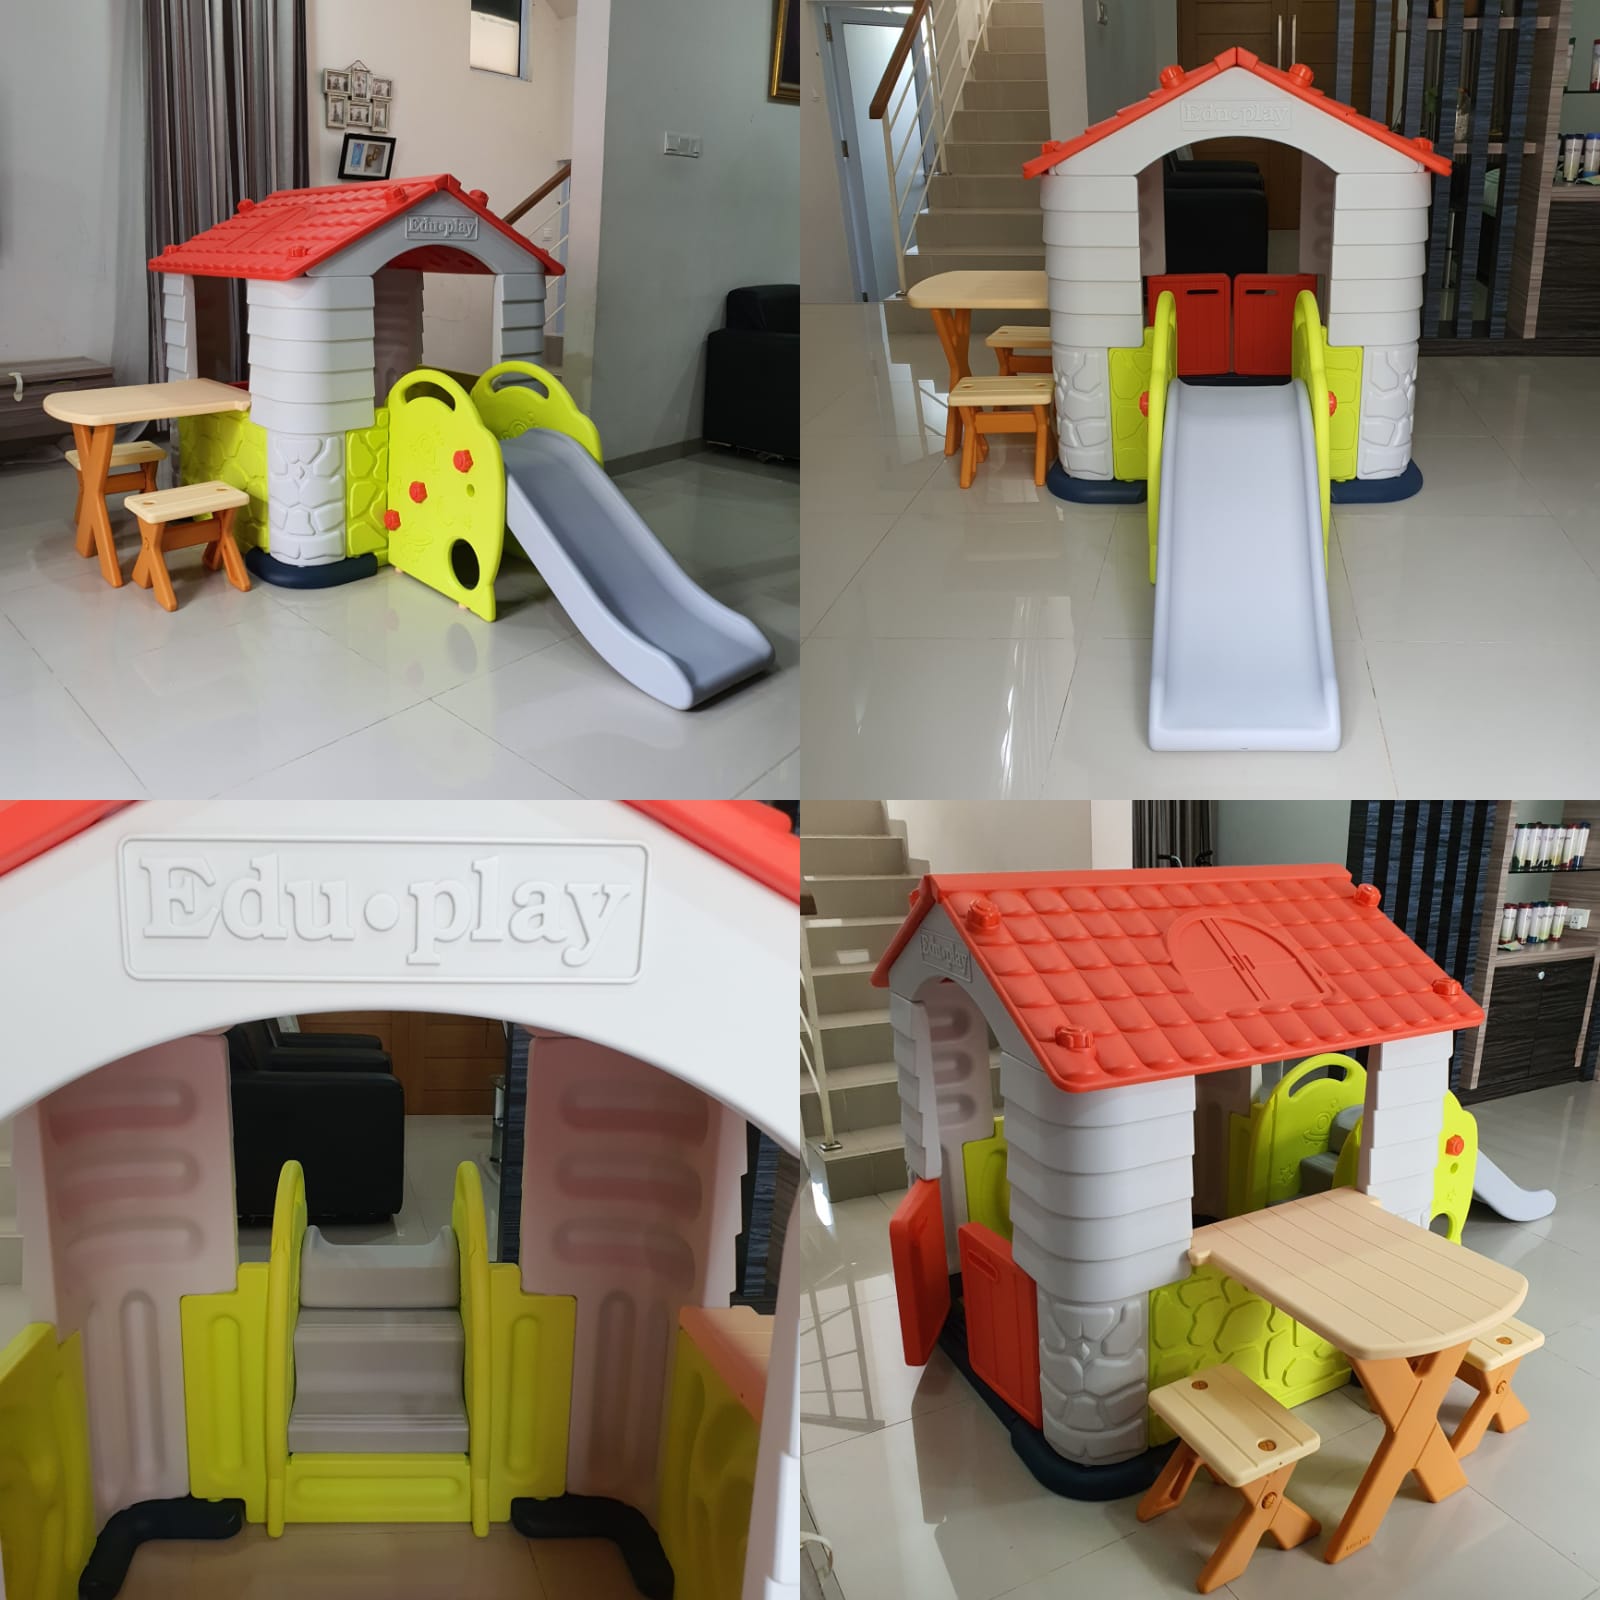 EDUPLAY PLAYHOUSE 4 WITH SLIDE AND TABLE SET